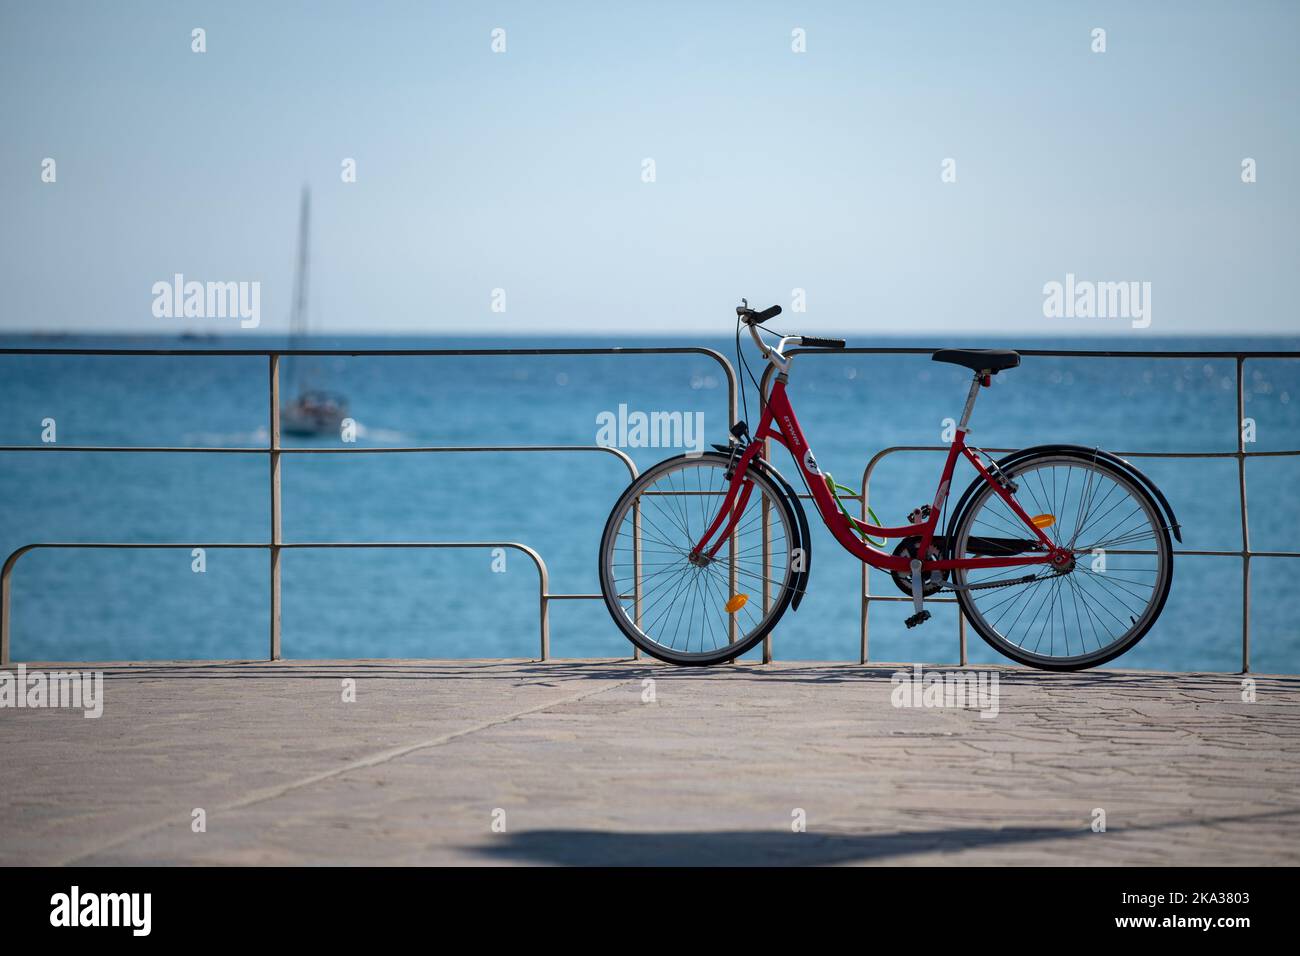 Lavagna Chiavari Riviera Liguria Italy Sept 2022 Bicycle resing against railings above beach and the sea. Stock Photo